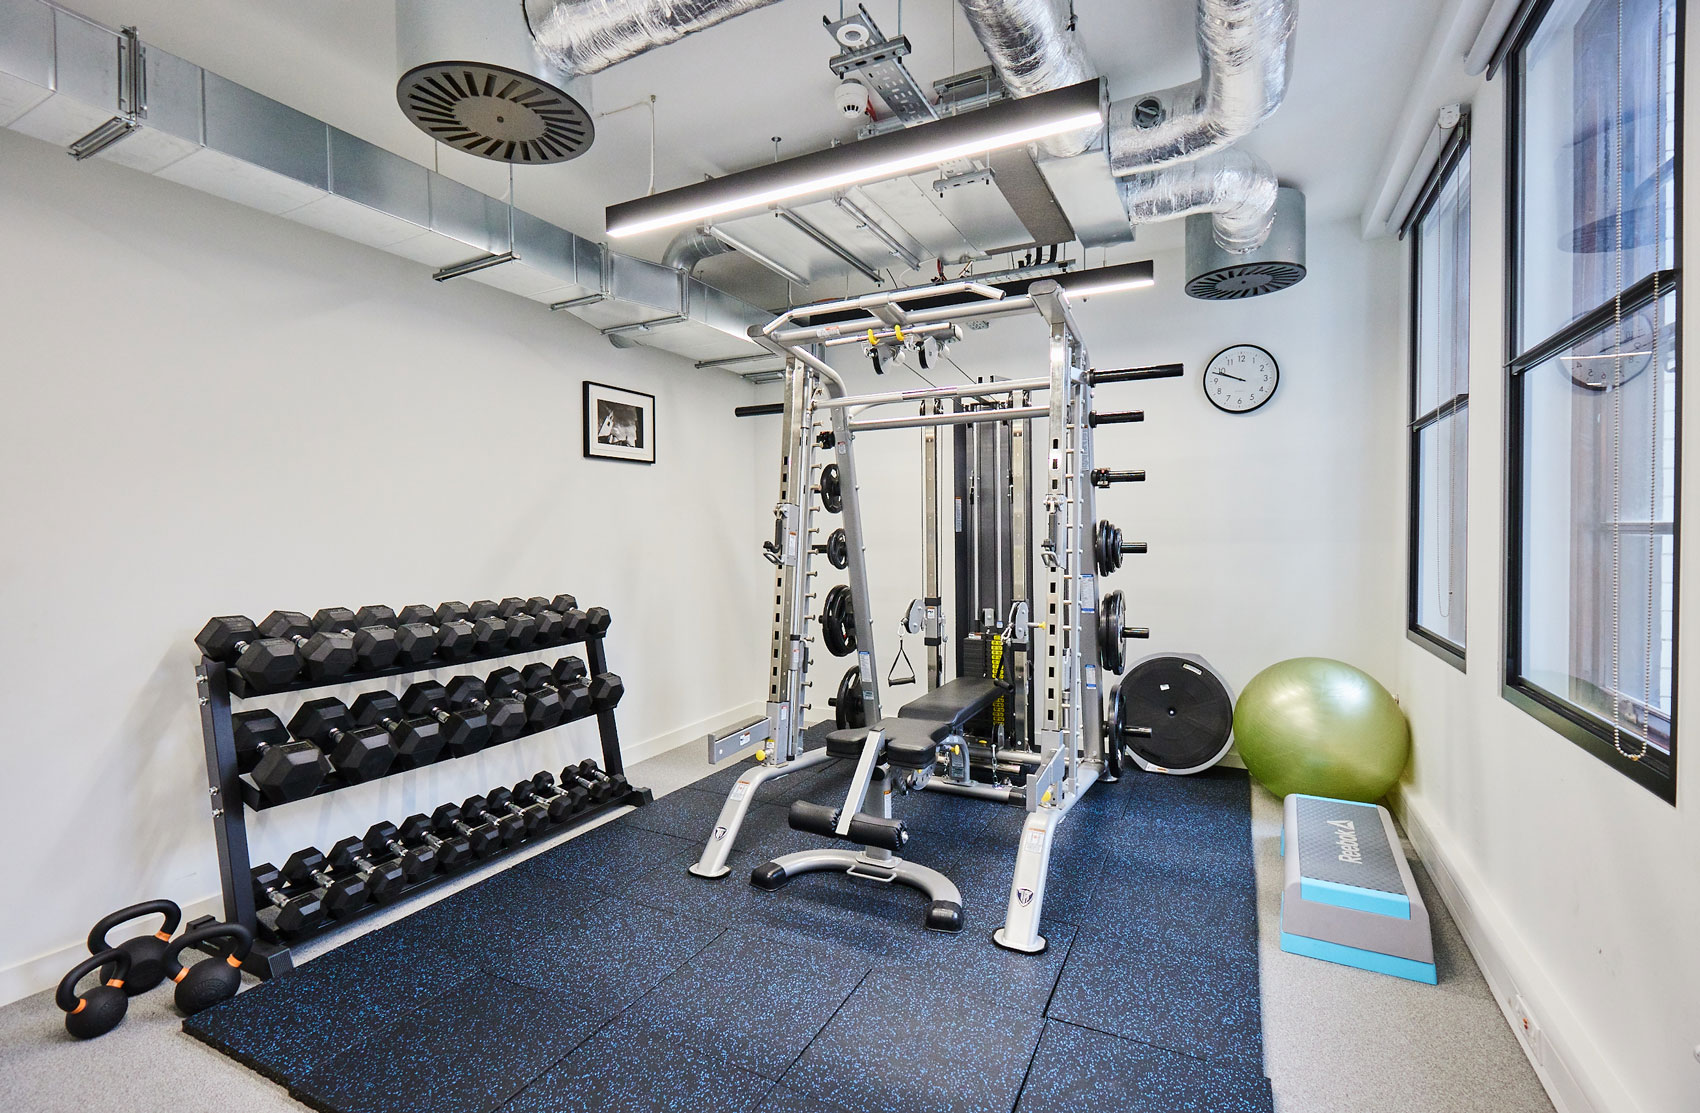 Office gym complete with a weight rack and exercise balls, promoting wellness and activity at work